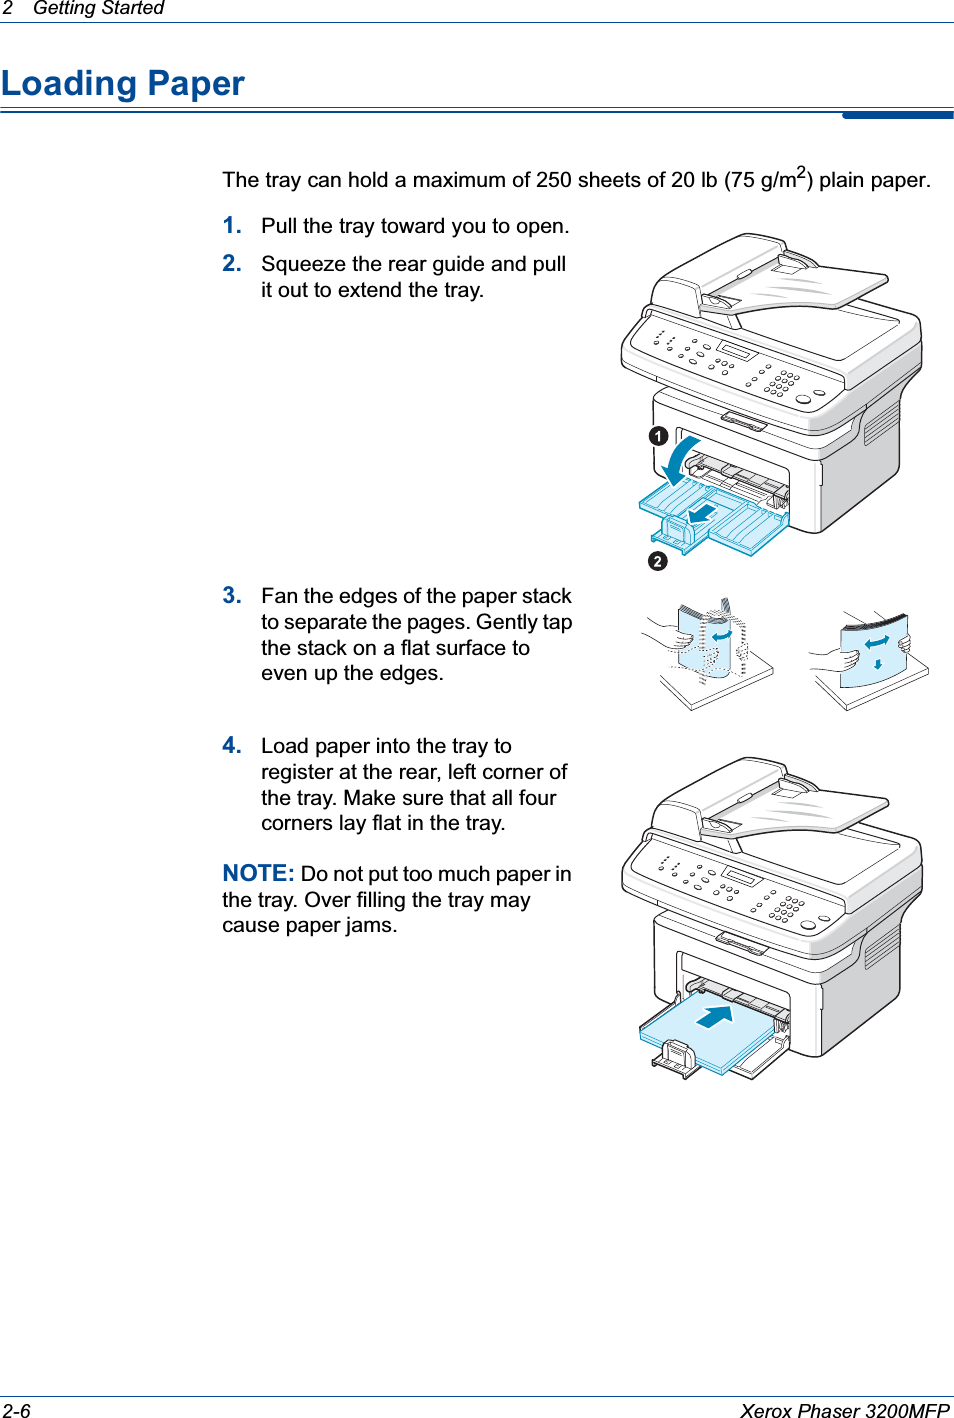 2 Getting Started 2-6 Xerox Phaser 3200MFPLoading PaperThe tray can hold a maximum of 250 sheets of 20 lb (75 g/m2) plain paper. 1. Pull the tray toward you to open.2. Squeeze the rear guide and pull it out to extend the tray.3. Fan the edges of the paper stack to separate the pages. Gently tap the stack on a flat surface to even up the edges.4. Load paper into the tray to register at the rear, left corner of the tray. Make sure that all four corners lay flat in the tray. NOTE: Do not put too much paper in the tray. Over filling the tray may cause paper jams.